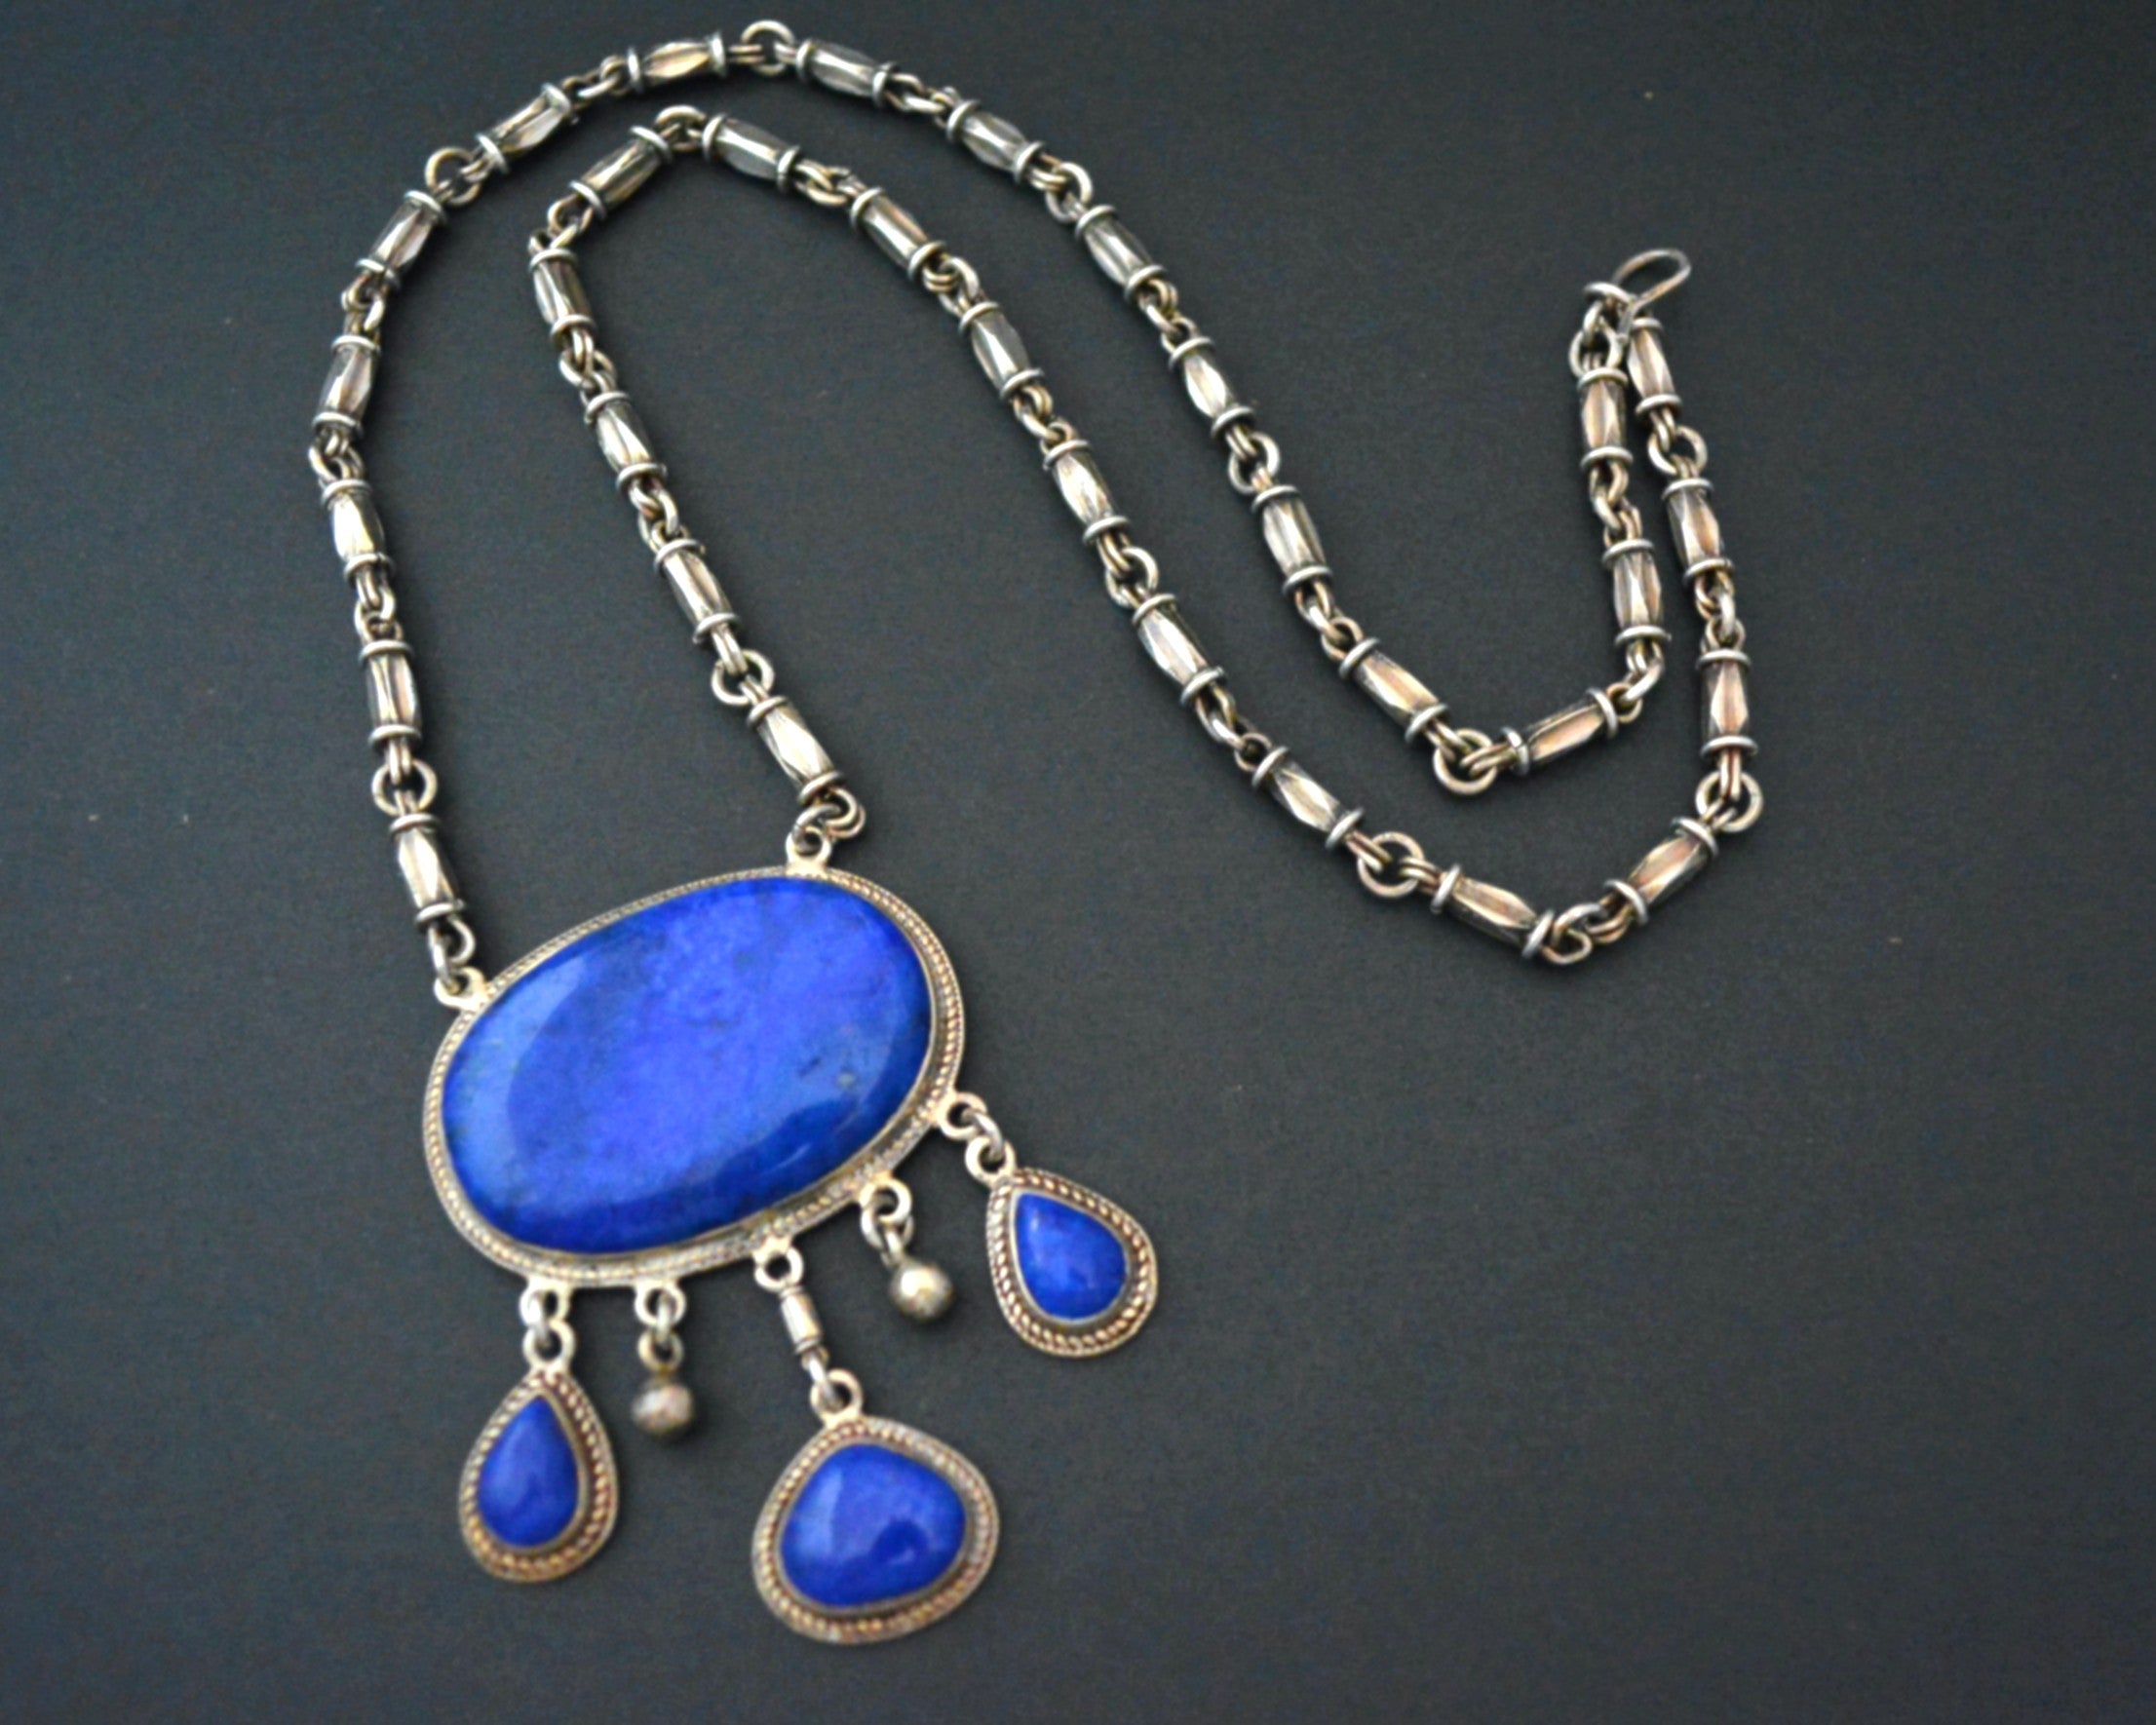 Lapis Lazuli Necklace from Egypt